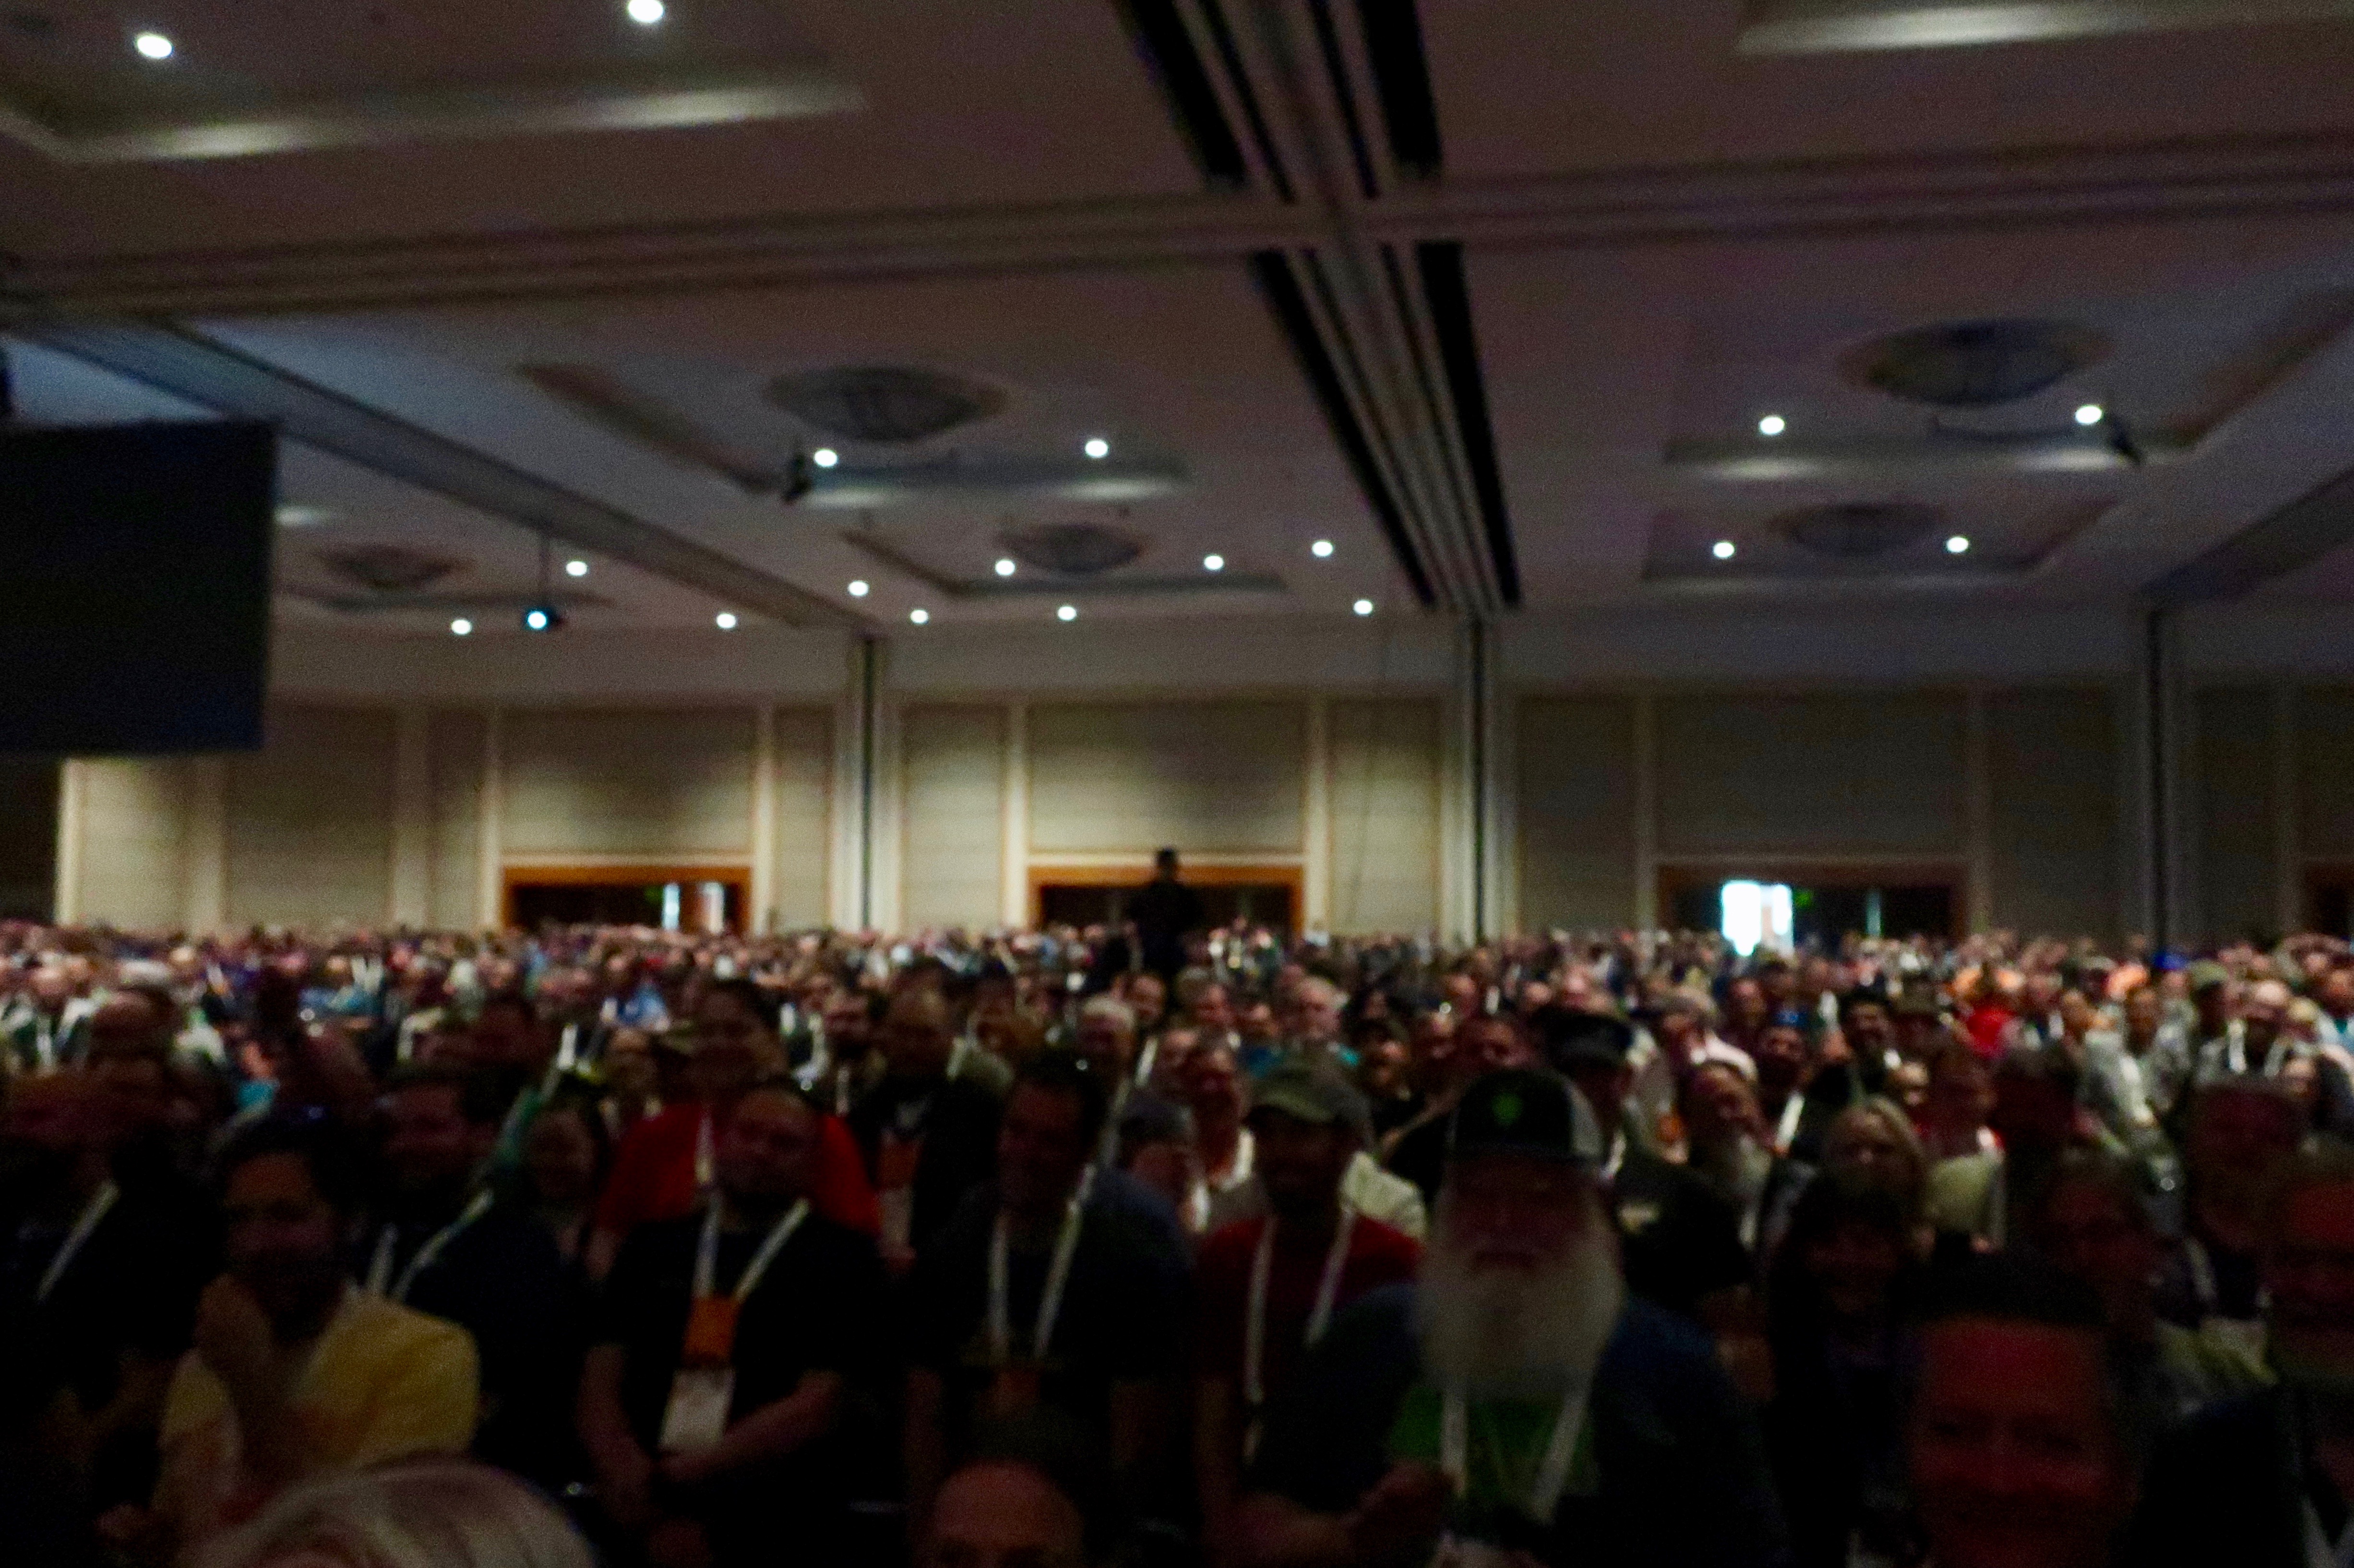 The crowd during the Keynote Address at Homebrew Con 2018.